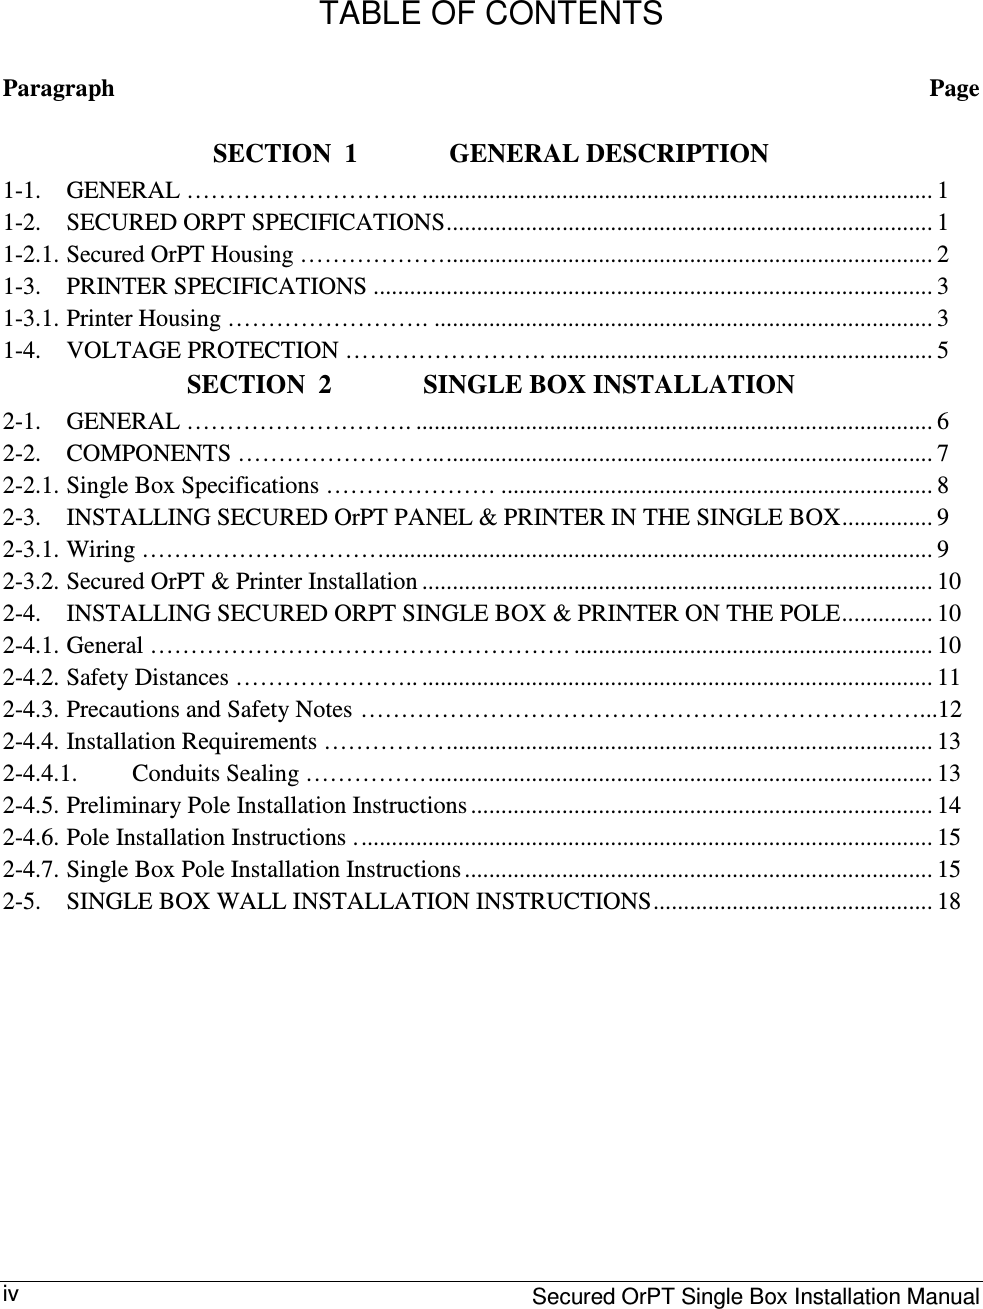     Secured OrPT Single Box Installation Manual iv  TABLE OF CONTENTS Paragraph  Page SECTION  1 GENERAL DESCRIPTION 1-1.  GENERAL ……………………….. .................................................................................... 1 1-2.  SECURED ORPT SPECIFICATIONS................................................................................ 1 1-2.1. Secured OrPT Housing ………………................................................................................ 2 1-3.  PRINTER SPECIFICATIONS ............................................................................................ 3 1-3.1. Printer Housing ……………………. .................................................................................. 3 1-4.  VOLTAGE PROTECTION ……………………. ............................................................... 5 SECTION  2 SINGLE BOX INSTALLATION 2-1.  GENERAL ………………………. ..................................................................................... 6 2-2.  COMPONENTS …………………….................................................................................. 7 2-2.1. Single Box Specifications ………………… ....................................................................... 8 2-3.  INSTALLING SECURED OrPT PANEL &amp; PRINTER IN THE SINGLE BOX............... 9 2-3.1. Wiring ………………………….......................................................................................... 9 2-3.2. Secured OrPT &amp; Printer Installation .................................................................................... 10 2-4.  INSTALLING SECURED ORPT SINGLE BOX &amp; PRINTER ON THE POLE............... 10 2-4.1. General ……………………………………………. ........................................................... 10 2-4.2. Safety Distances ………………….. .................................................................................... 11 2-4.3. Precautions and Safety Notes  ……………………………………………………………...12 2-4.4. Installation Requirements ……………................................................................................ 13 2-4.4.1.  Conduits Sealing ……………................................................................................... 13 2-4.5. Preliminary Pole Installation Instructions ............................................................................ 14 2-4.6. Pole Installation Instructions ............................................................................................... 15 2-4.7. Single Box Pole Installation Instructions ............................................................................. 15 2-5.  SINGLE BOX WALL INSTALLATION INSTRUCTIONS.............................................. 18          